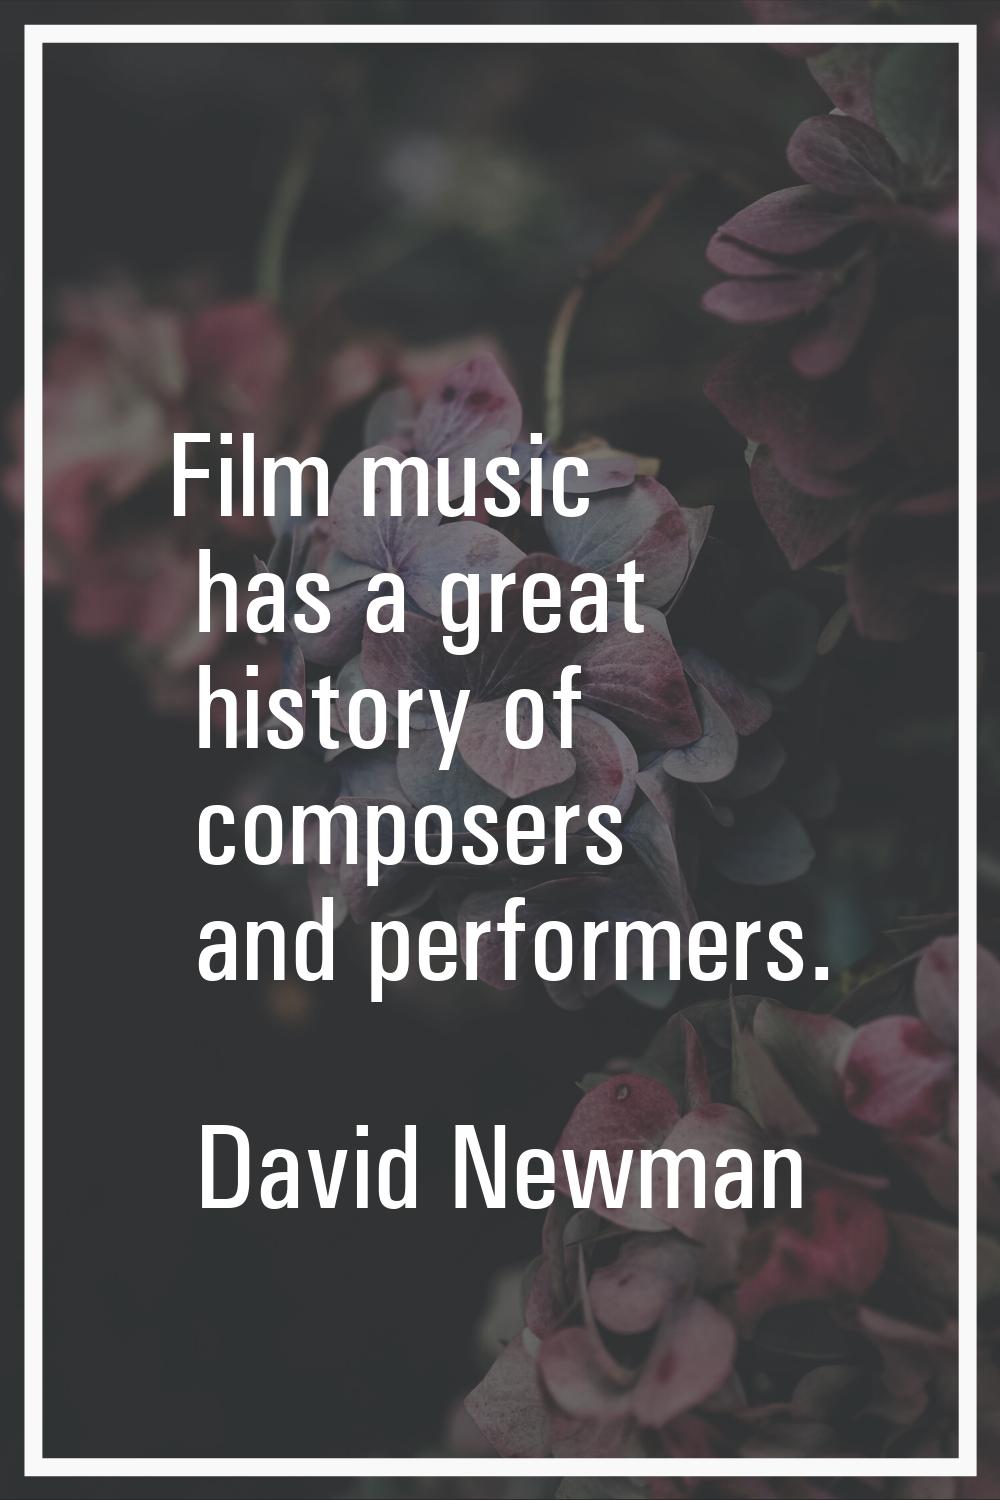 Film music has a great history of composers and performers.